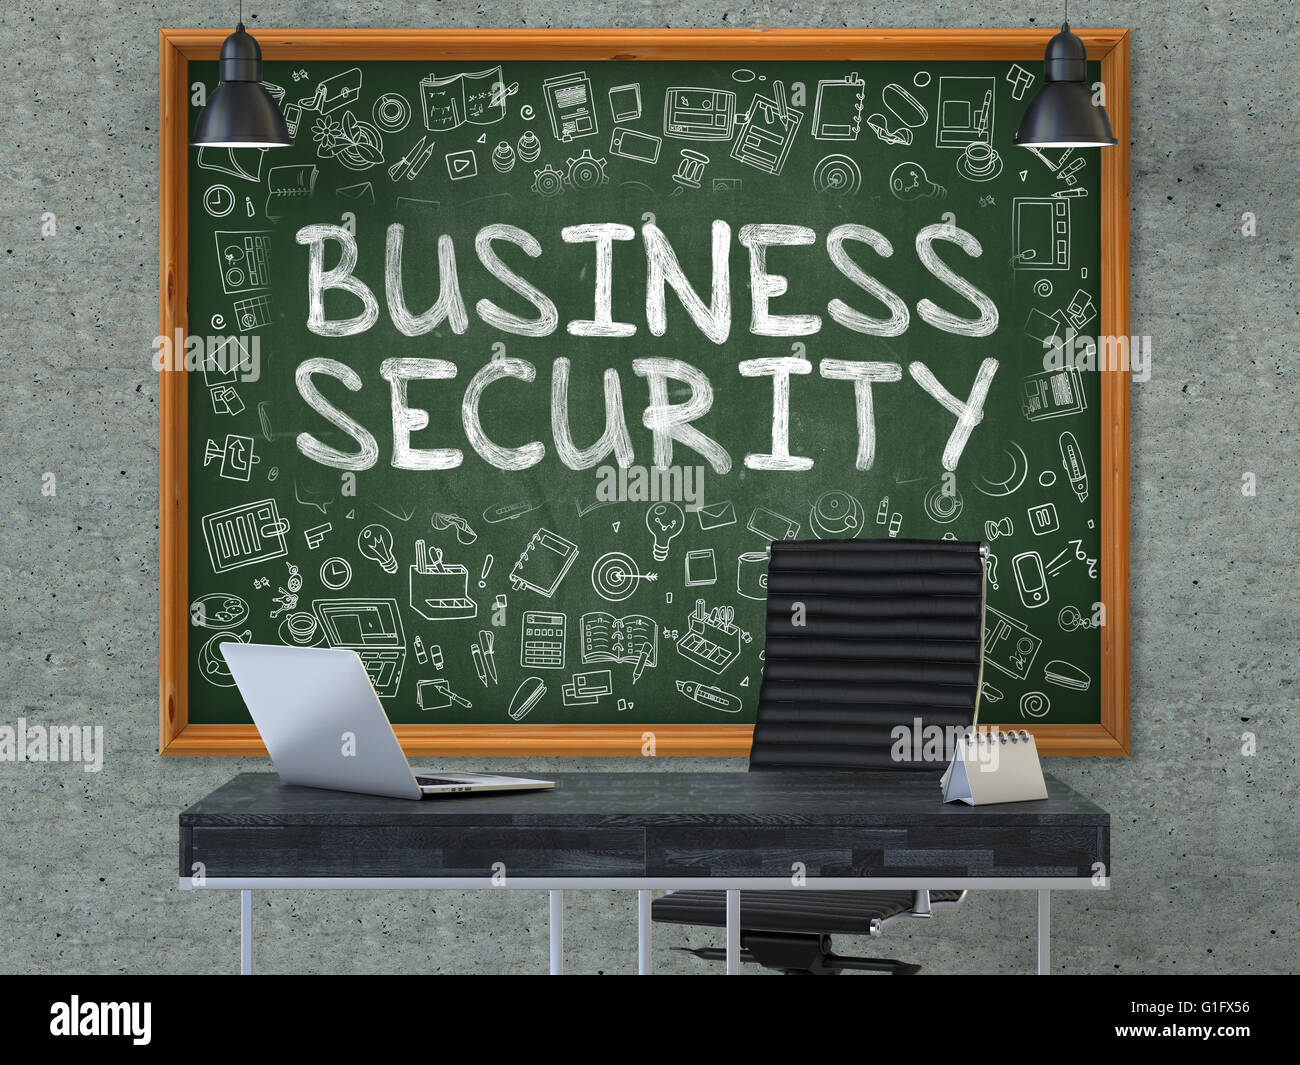 Business Security on Chalkboard with Doodle Icons. Stock Photo